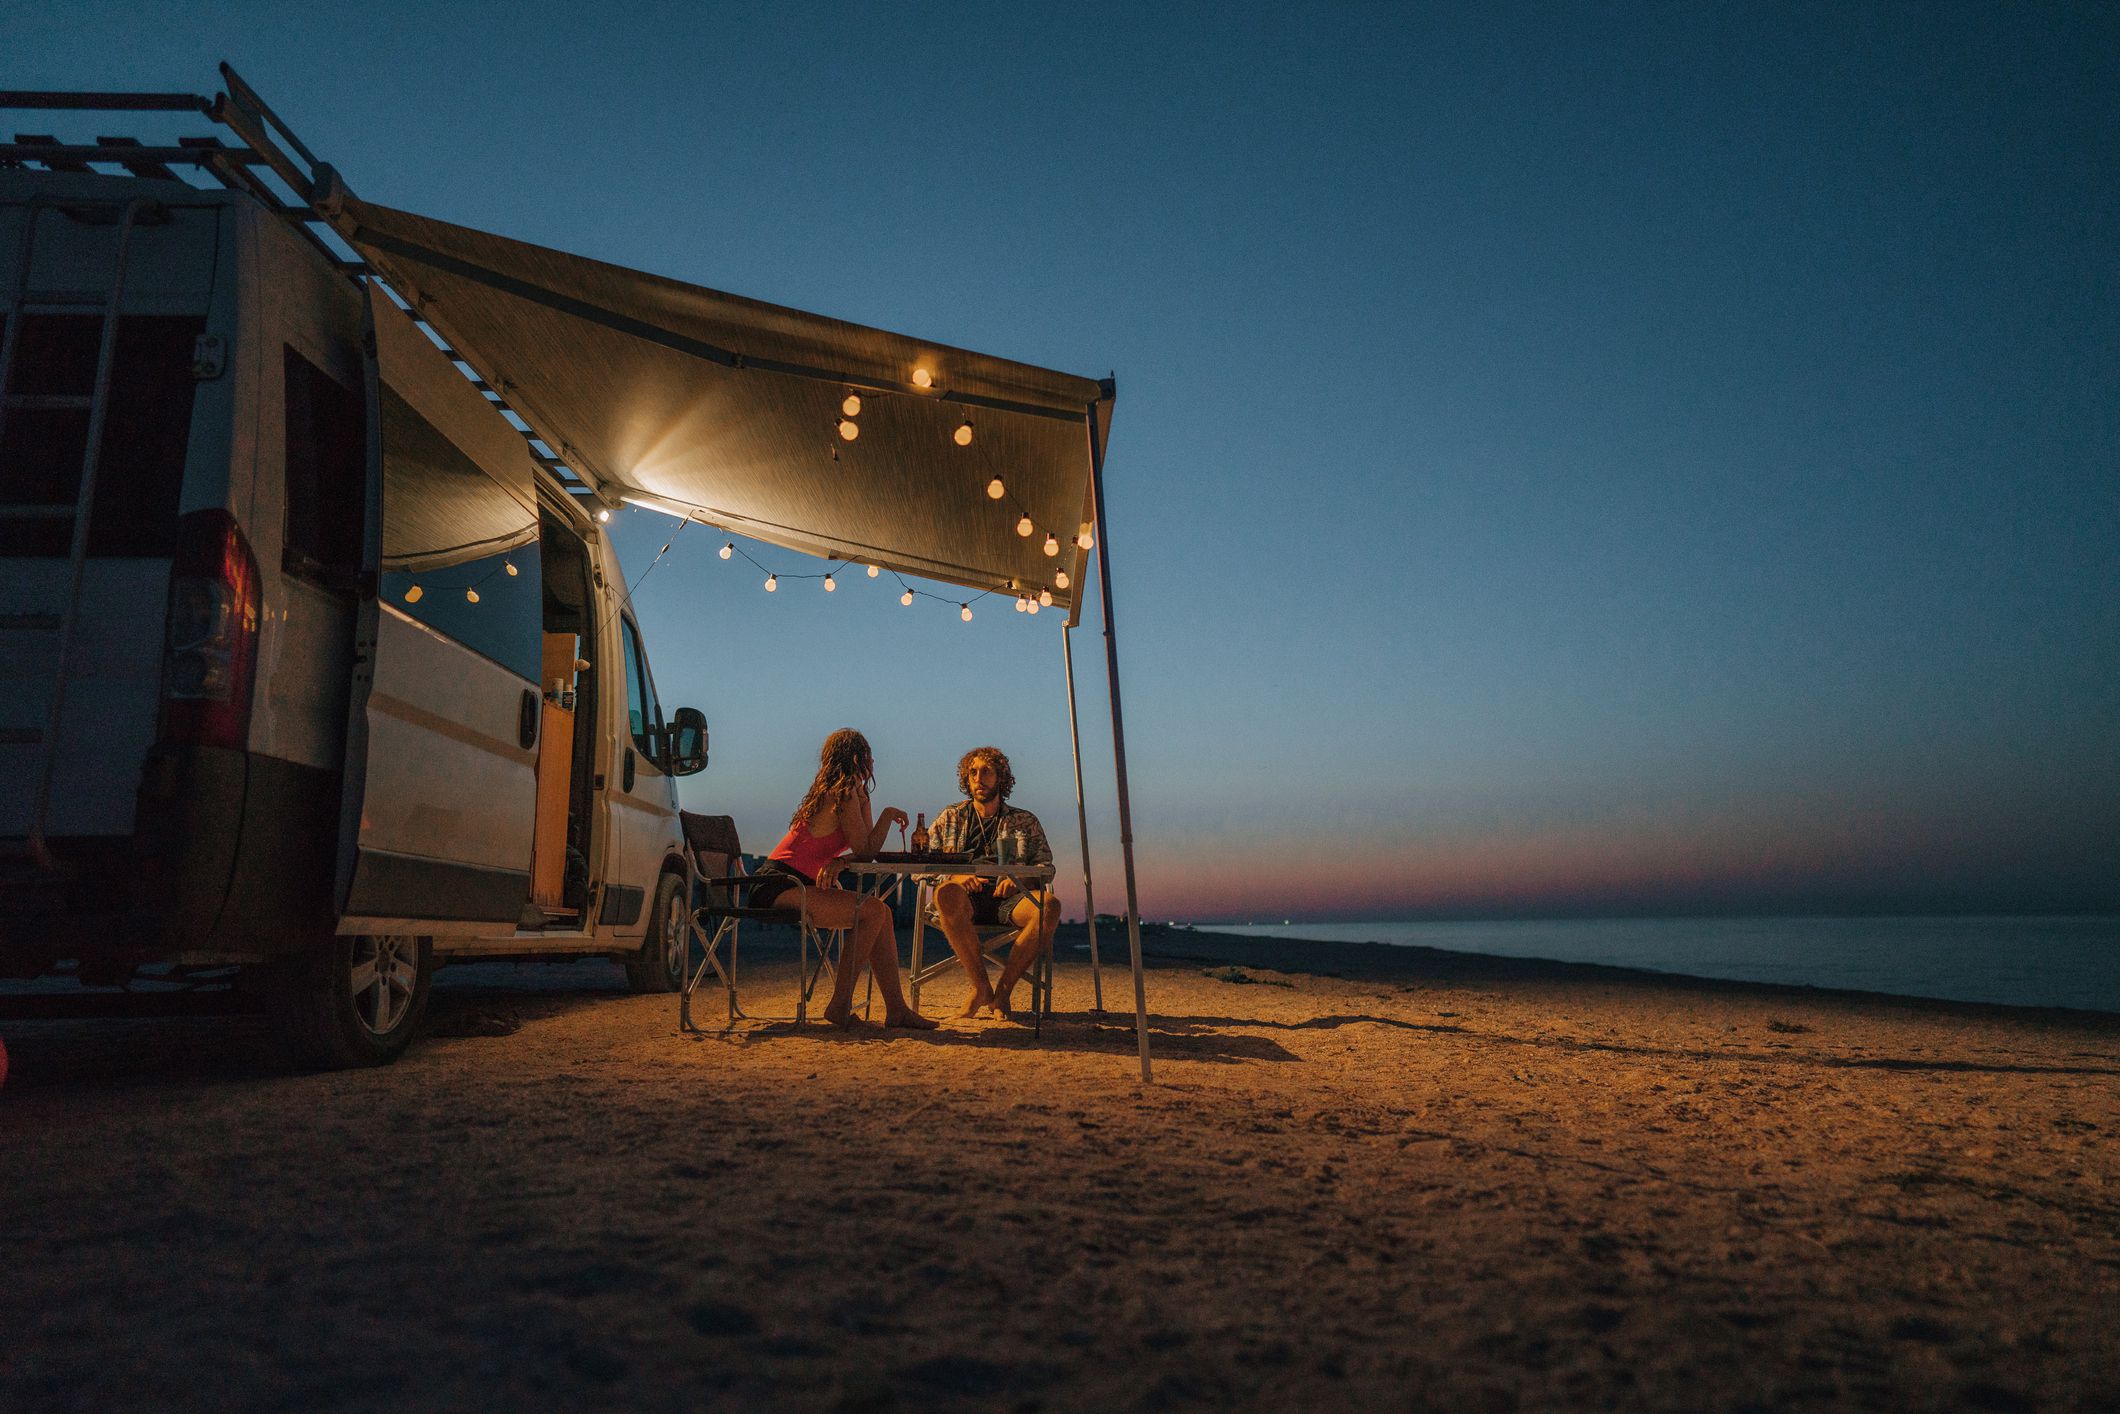 <p>Most RVers enjoy the glamping experience, with half of first-time campers reporting such an experience in 2020. But 30% of all RVers report camping outside of traditional campground or RV parks. This could include boondocking (which involves camping for free on public lands) or stopping at Walmart parking lots or the like during a cross-country trip.</p>